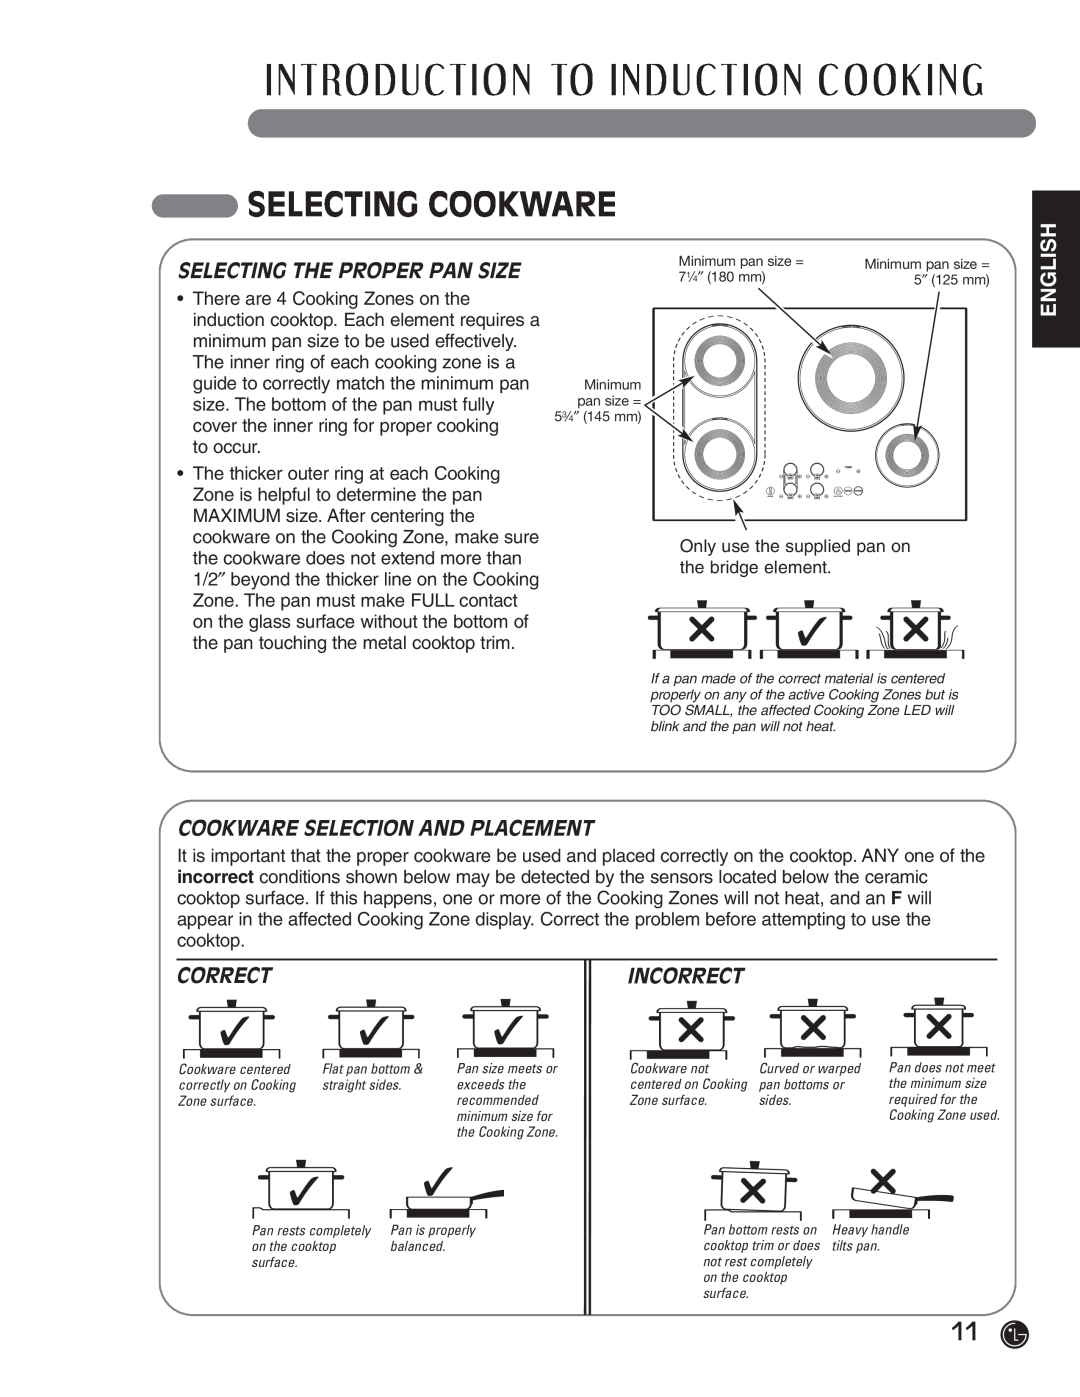 LG Electronics HN7413AG Selecting The Proper Pan Size, Cookware Selection And Placement, Correct, Selecting Cookware 